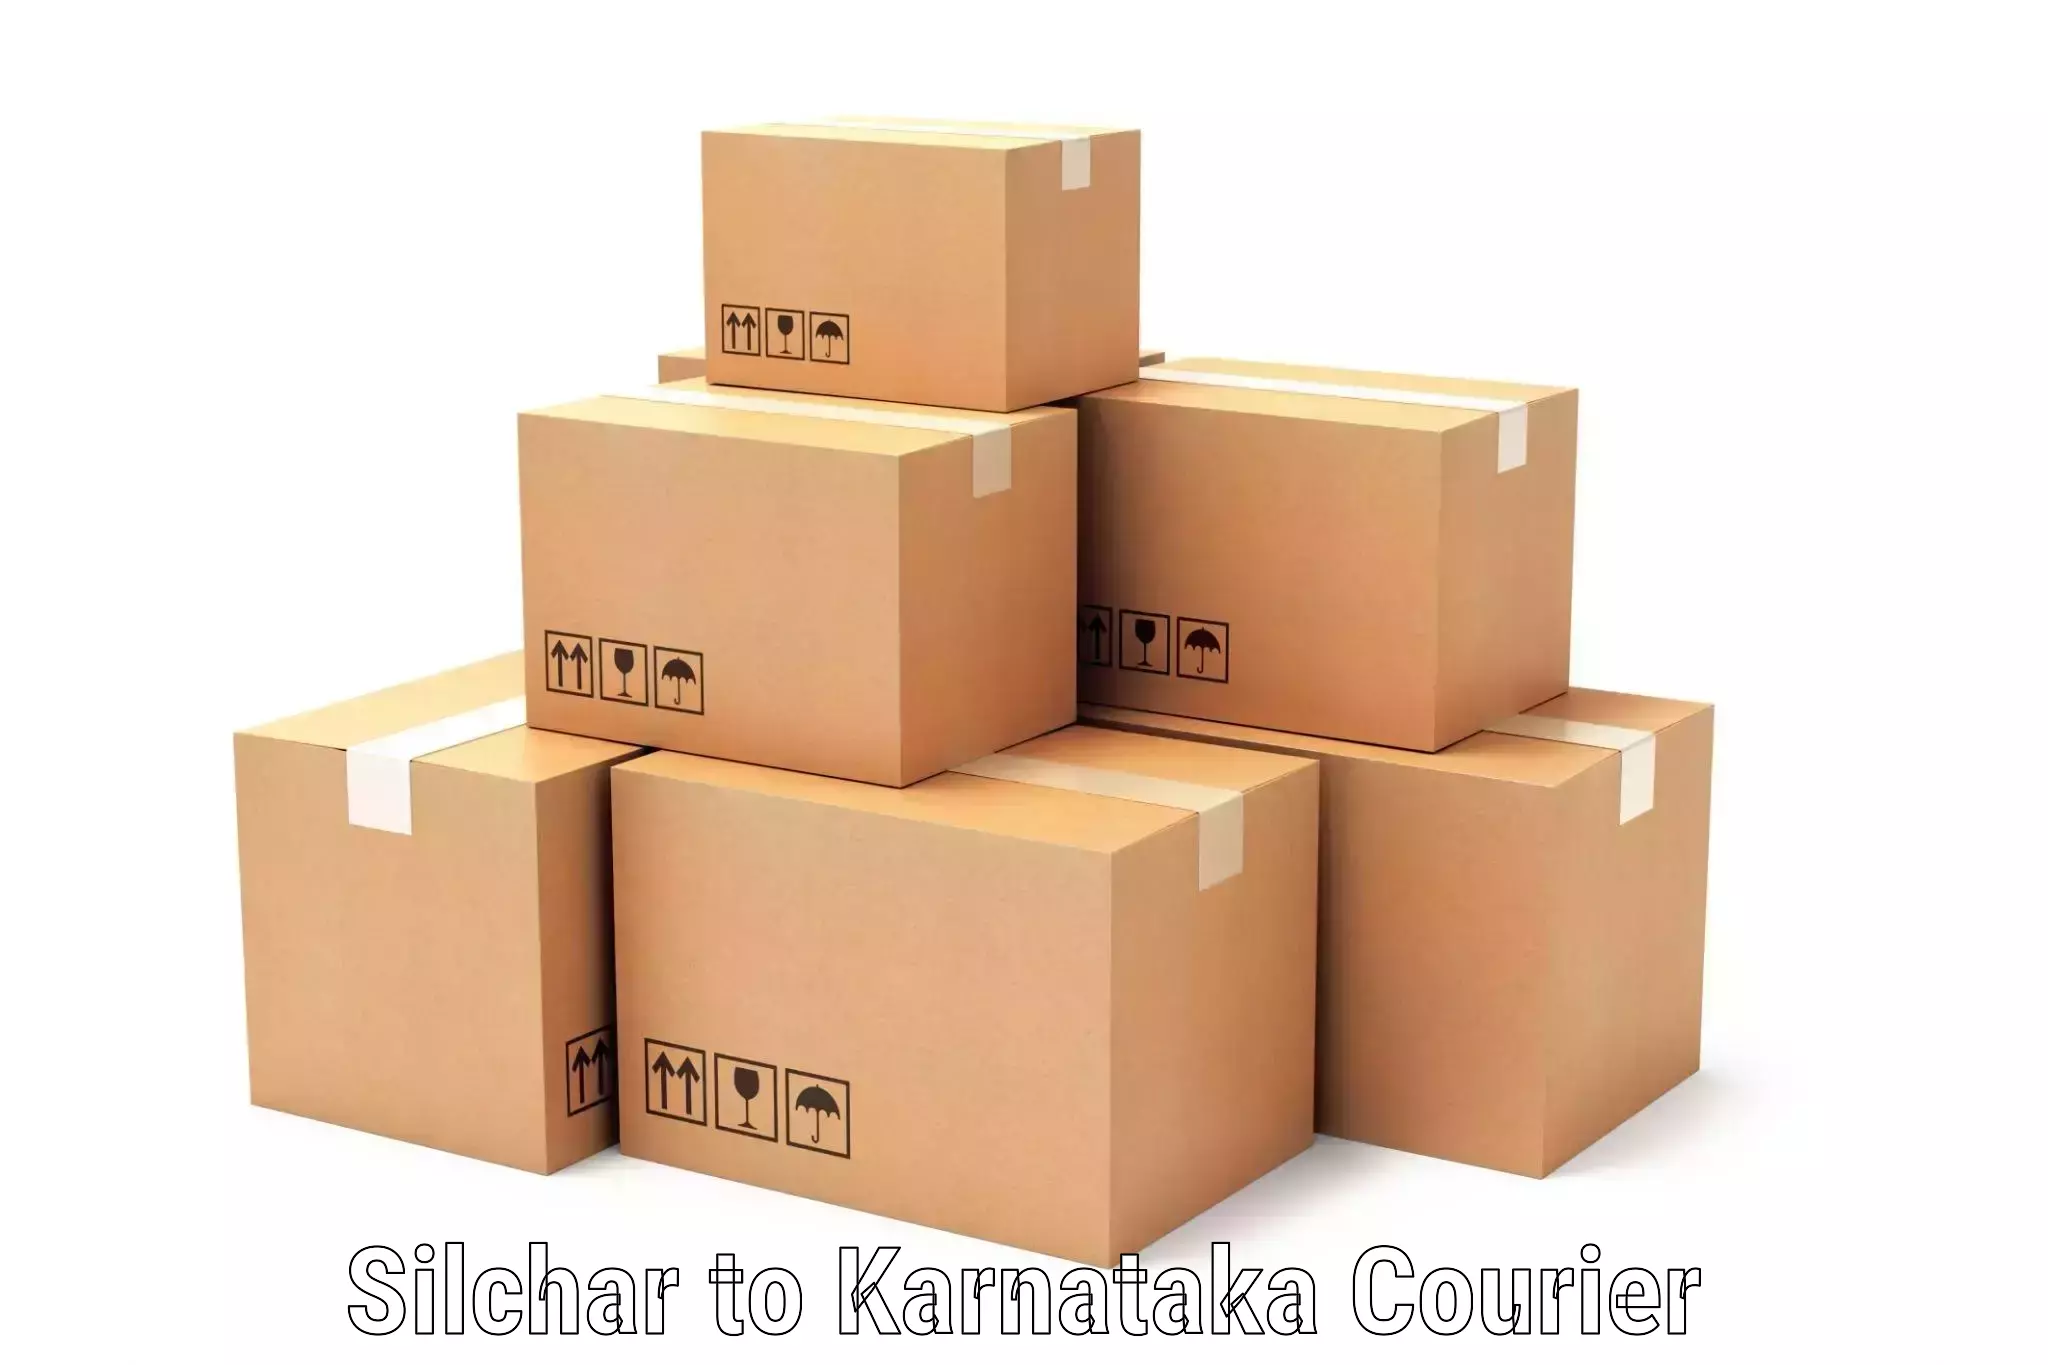 Global shipping solutions Silchar to Dharwad